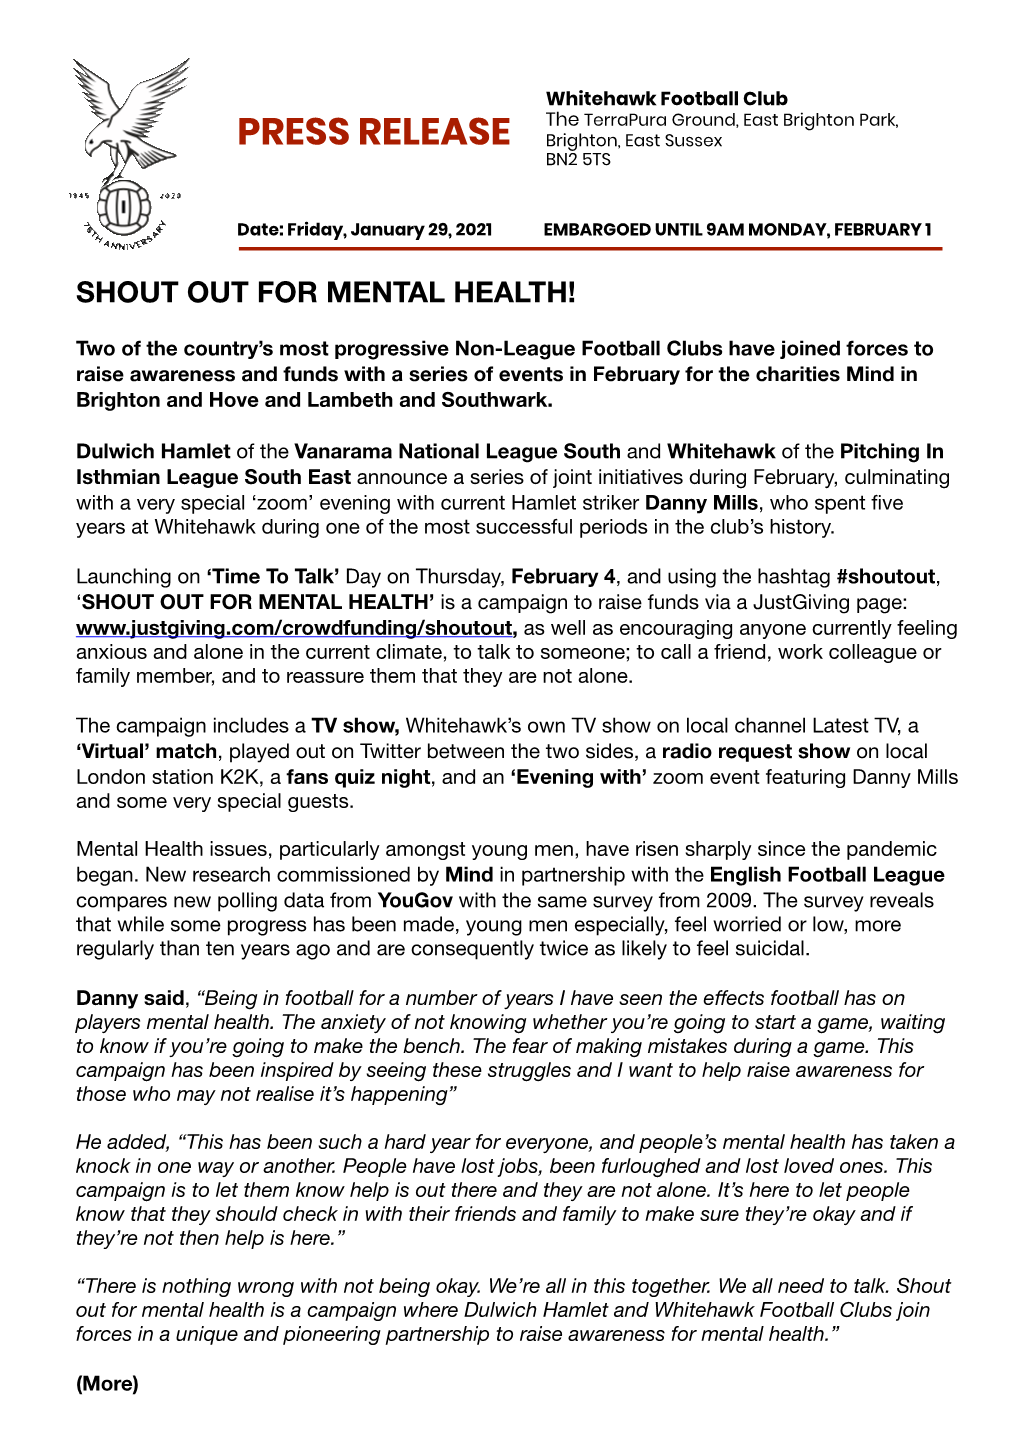 Shout out for Mental Health!